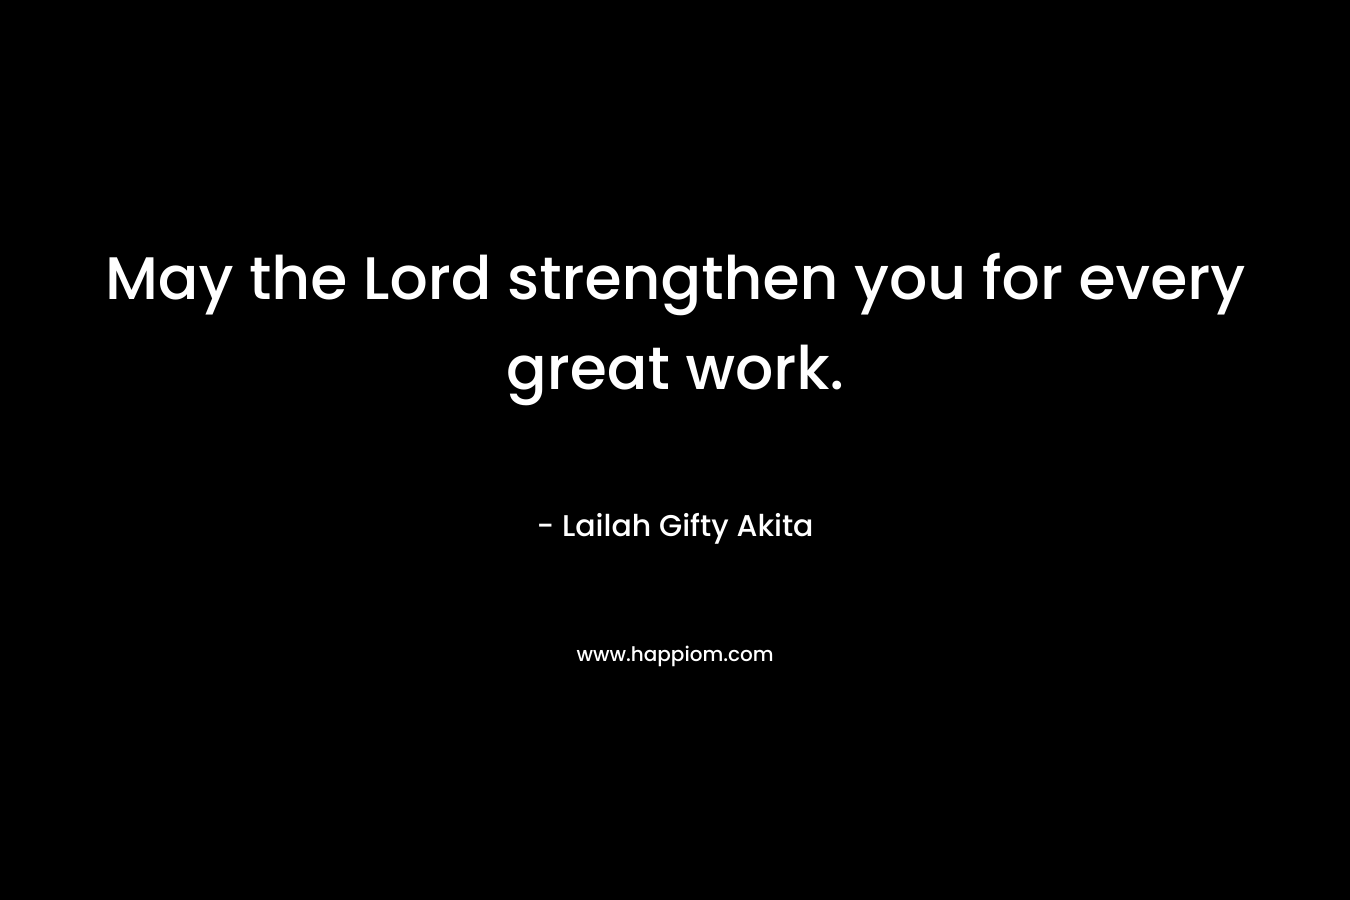 May the Lord strengthen you for every great work.